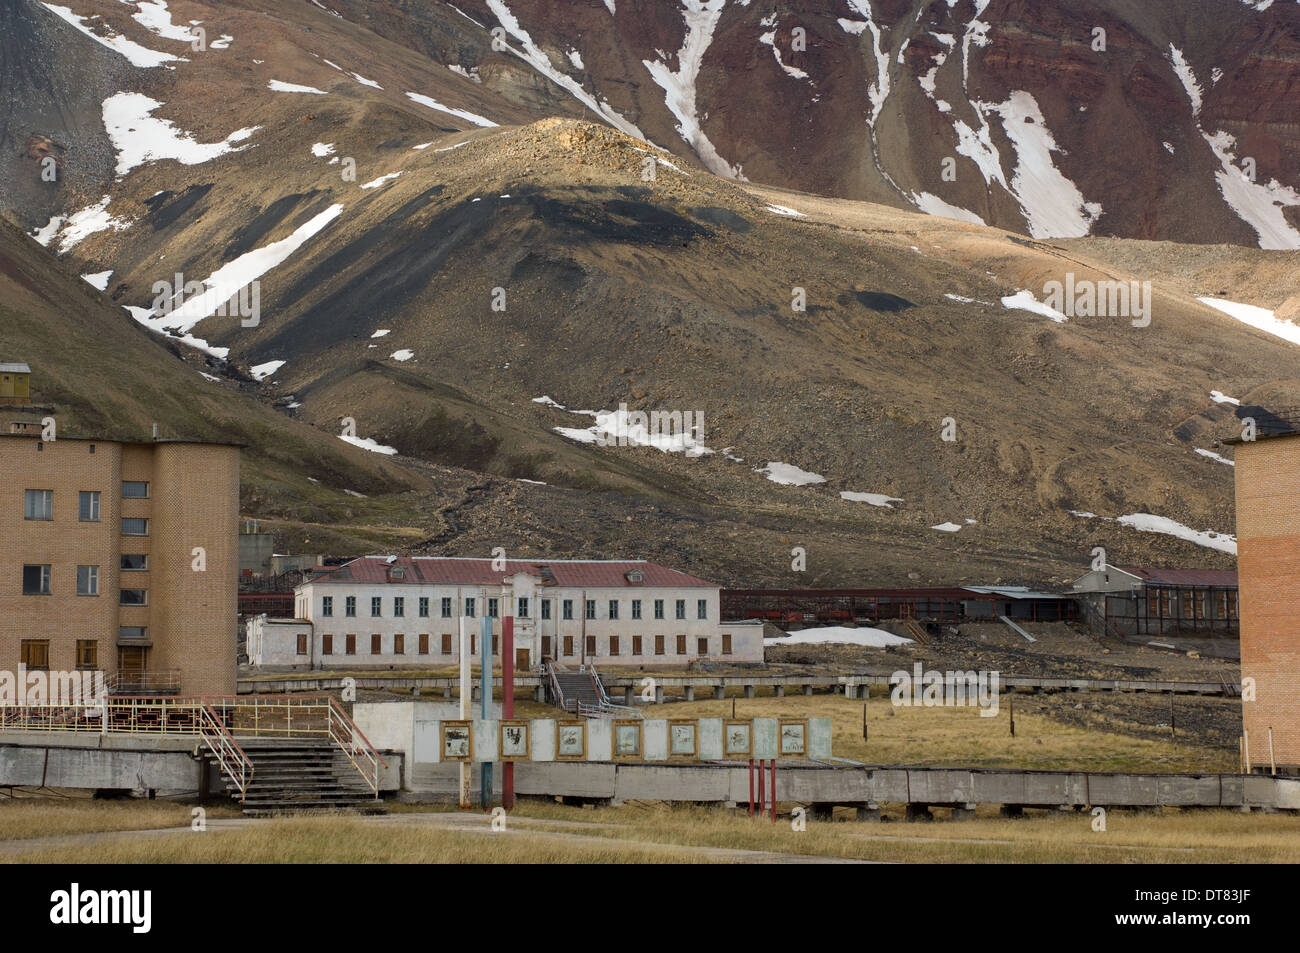 Abandoned civic buildings with looming cliffs behind, at the deserted Soviet Russian mining settlement of Pyramiden, Spitsbergen, Svalbard Archipelago, Norway Stock Photo